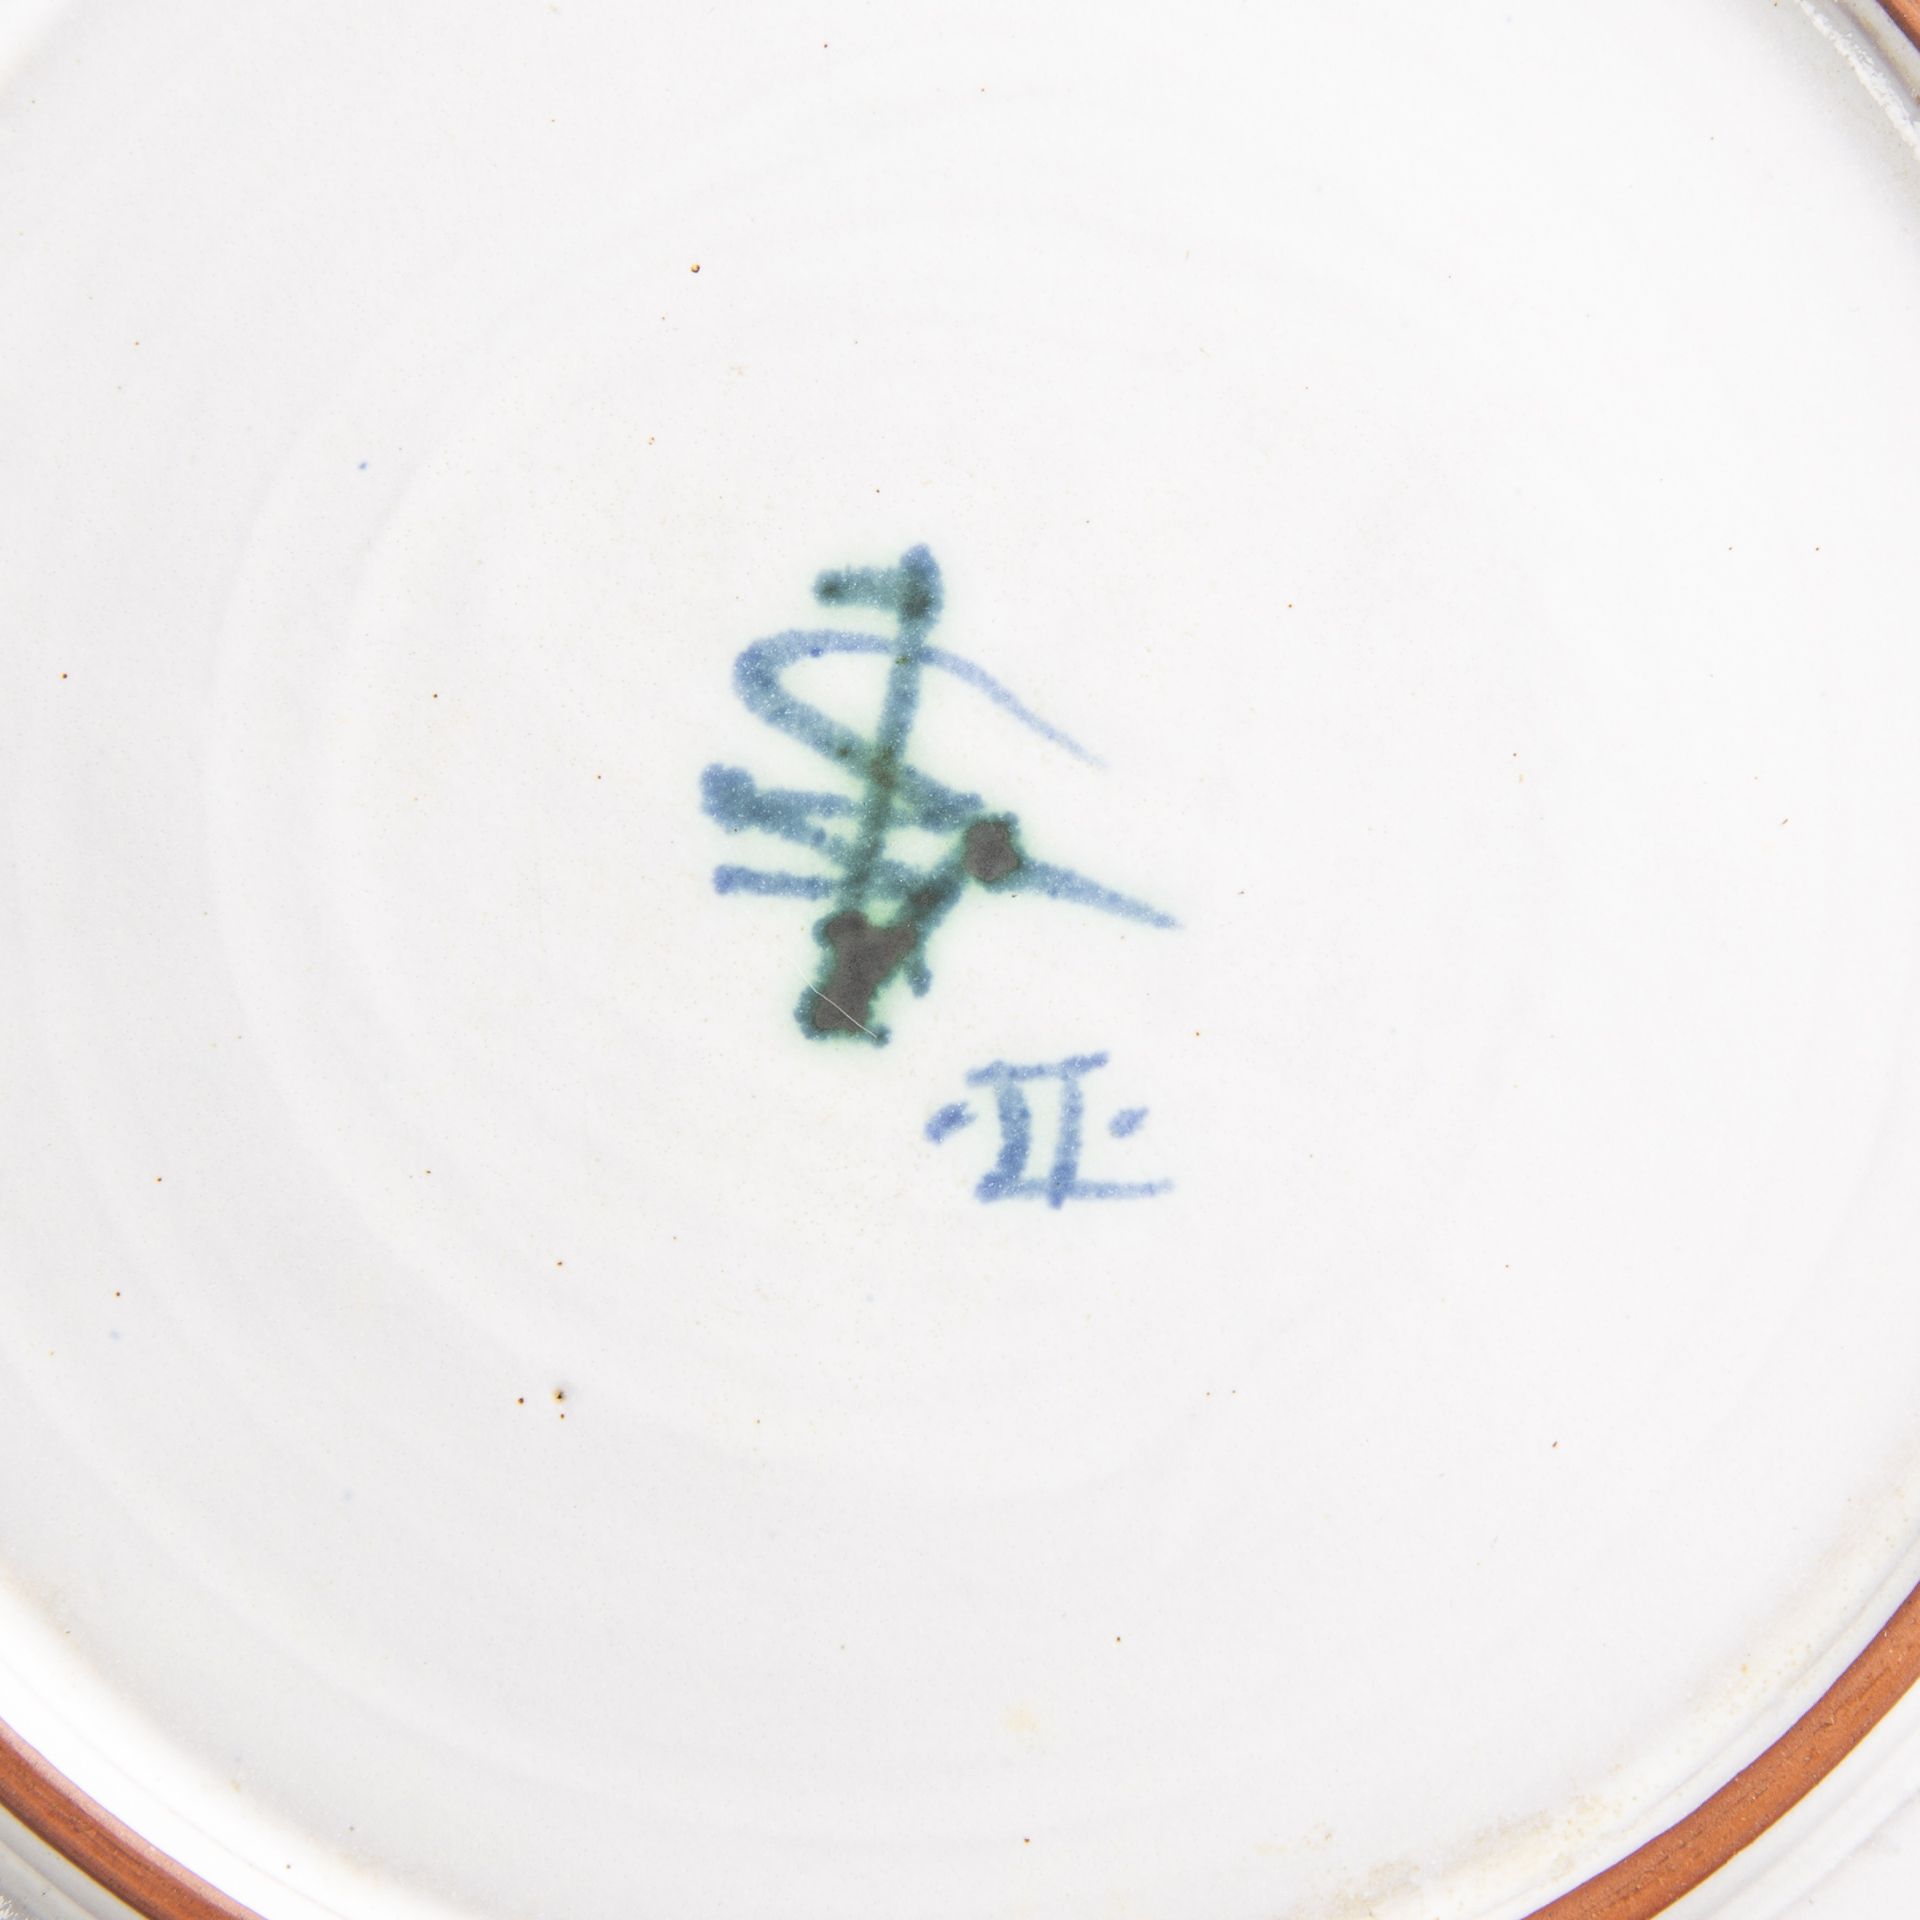 Alan Caiger-Smith (1930-2020) at Aldermaston Pottery tin-glazed earthenware dinner service, to - Image 3 of 21